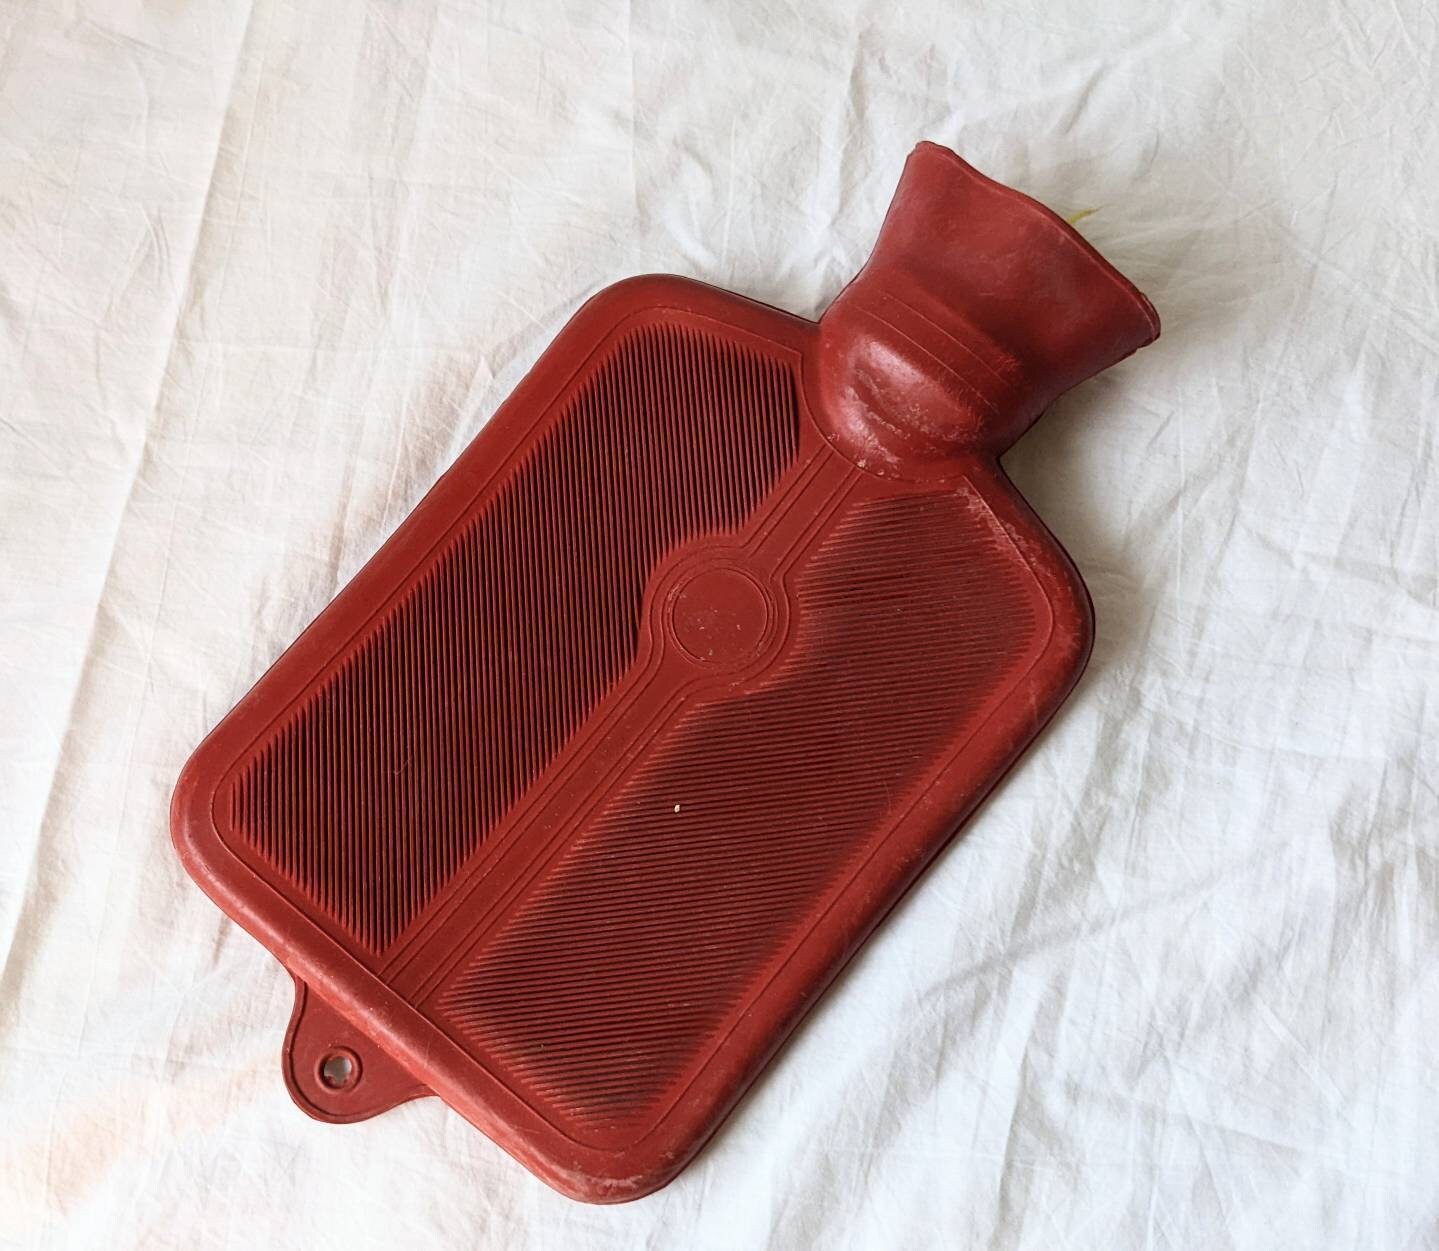 Rubber Hot Water Bottle with Fleece Cover - The Vermont Country Store